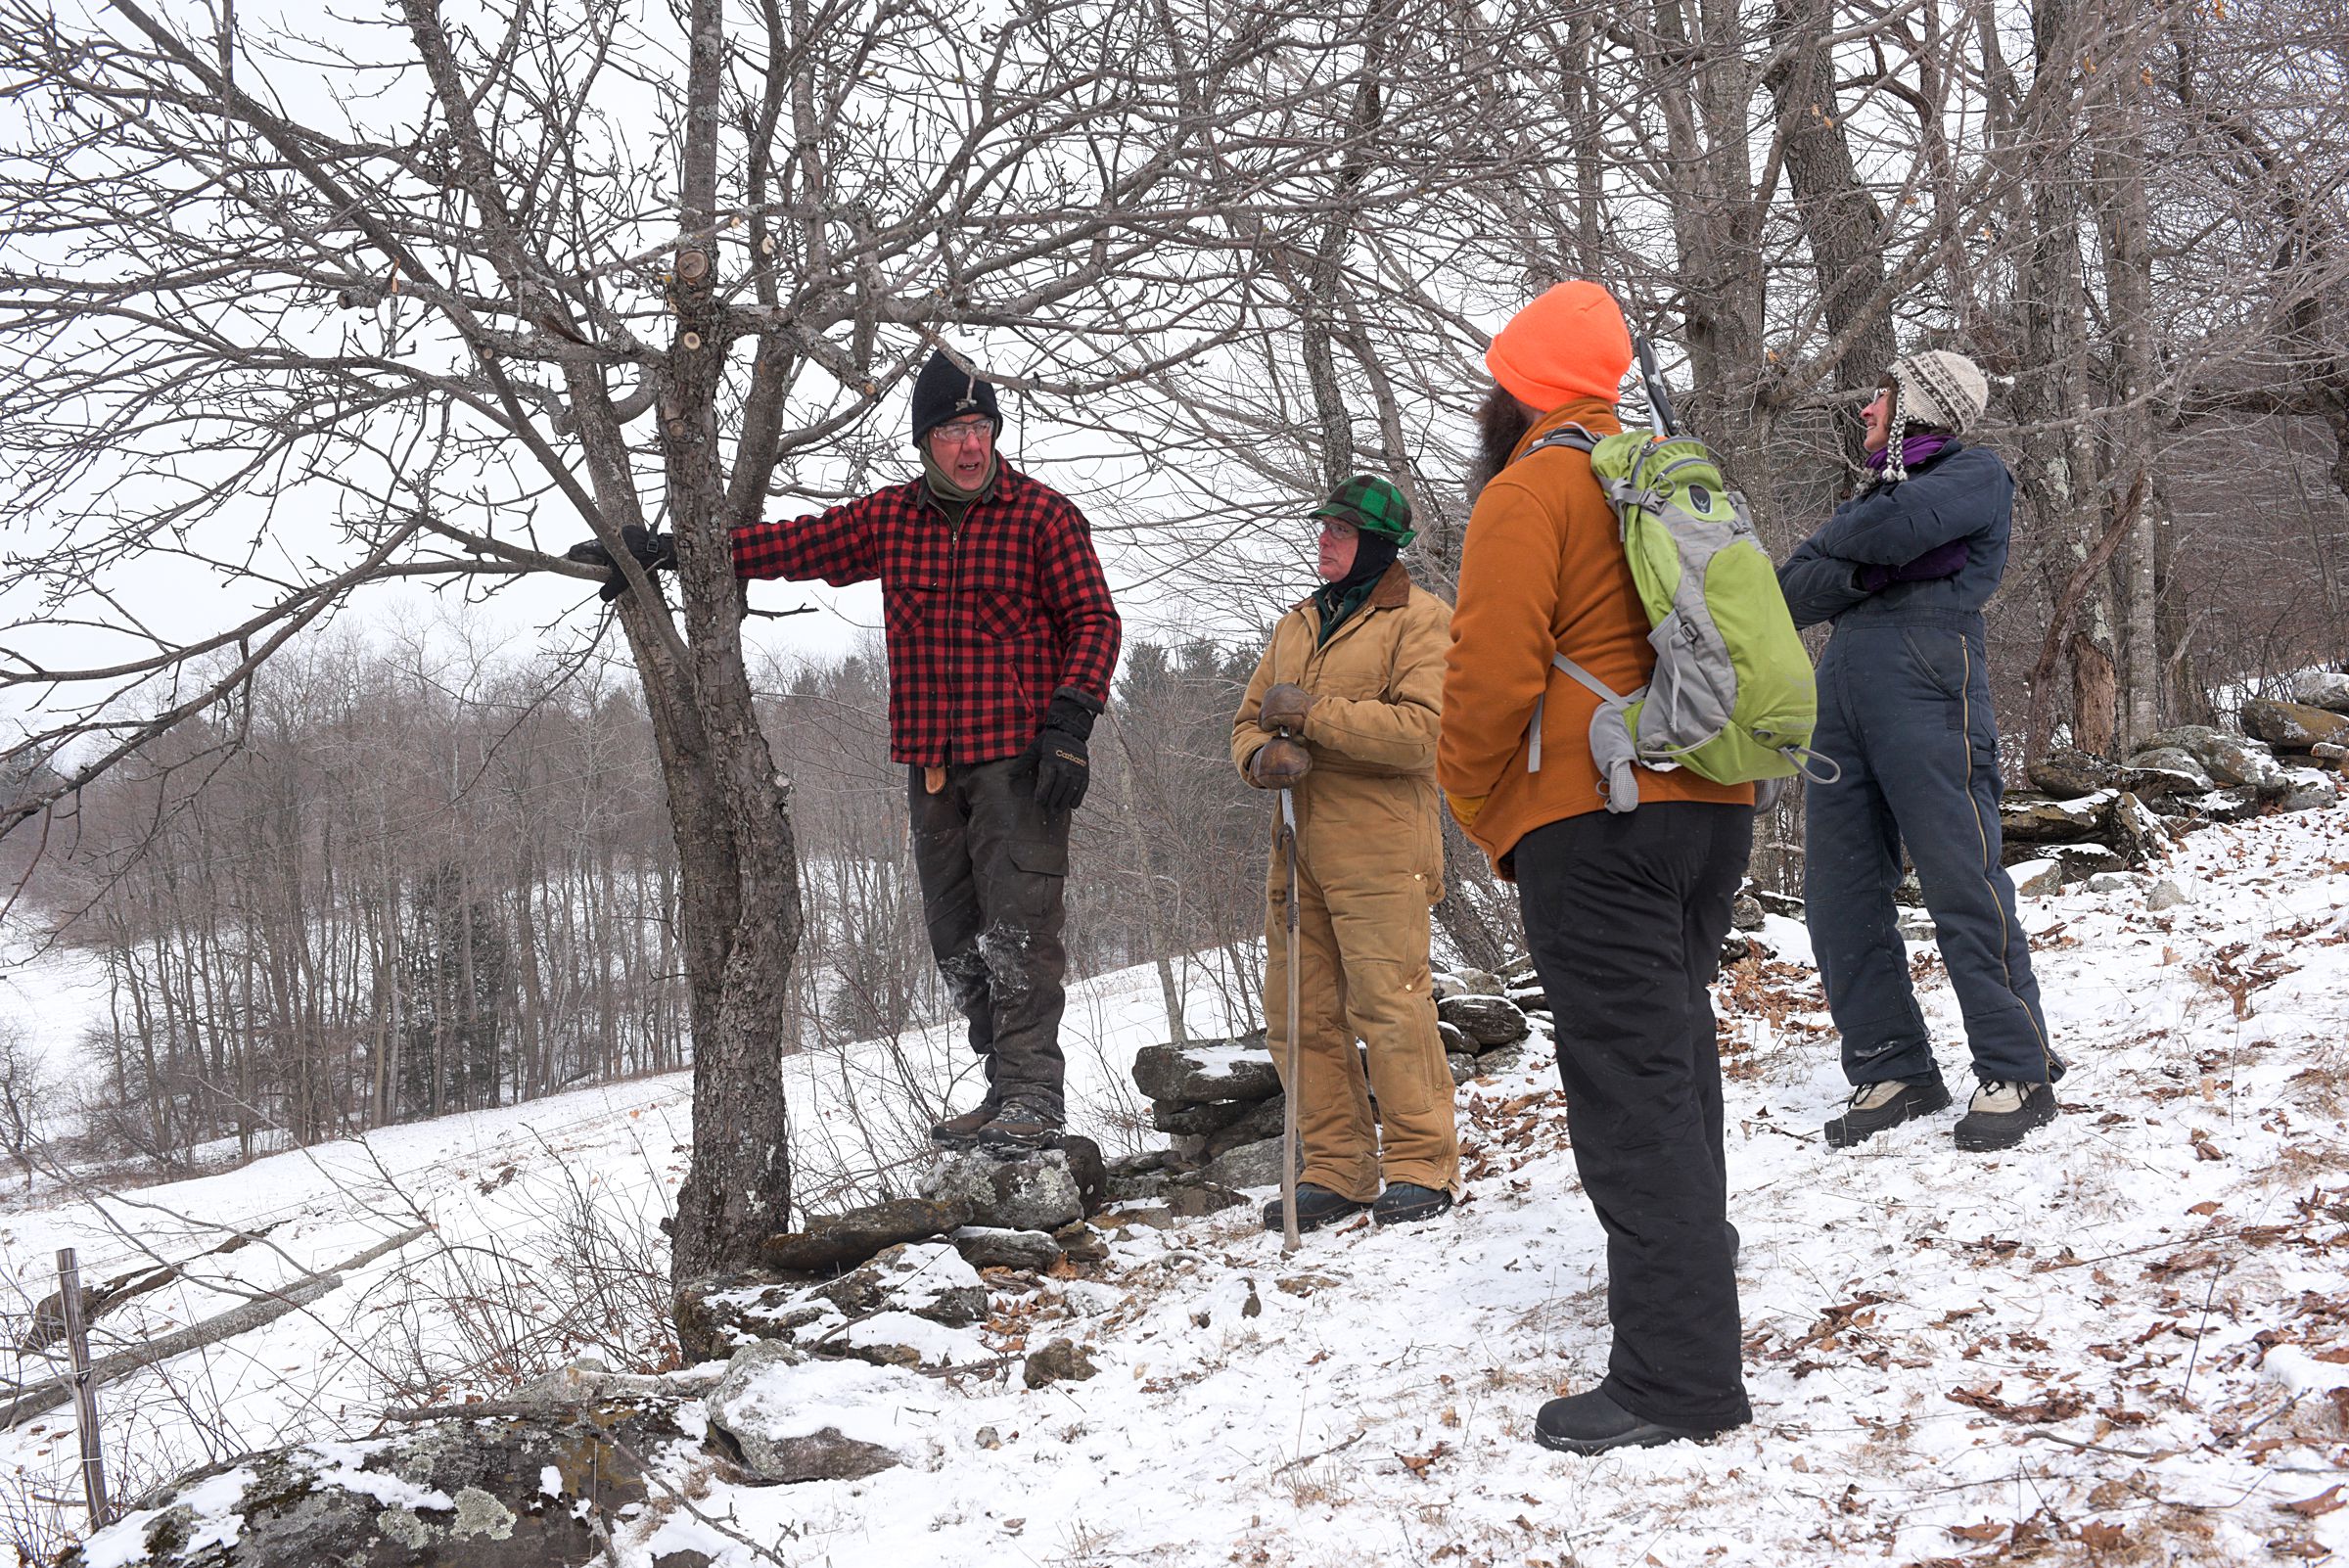 Orange County foresters Dave Paganelli, left, and Paul Harwood, second from left, discuss their strategy for pruning a wild apple with Judith Falk, of South Strafford, right, and Nate Thames, of Vershire, second from right, during an apple pruning workshop on the land of Larry Mengedoht in Tunbridge, Vt., Saturday, March 11, 2017. The workshop focused less on increasing apple production by old or wild apple trees for human consumption, and more improving neglected trees for animal and bird consumption and habitat. March 11, 2017. (Valley News - James M. Patterson) Copyright Valley News. May not be reprinted or used online without permission. Send requests to permission@vnews.com.